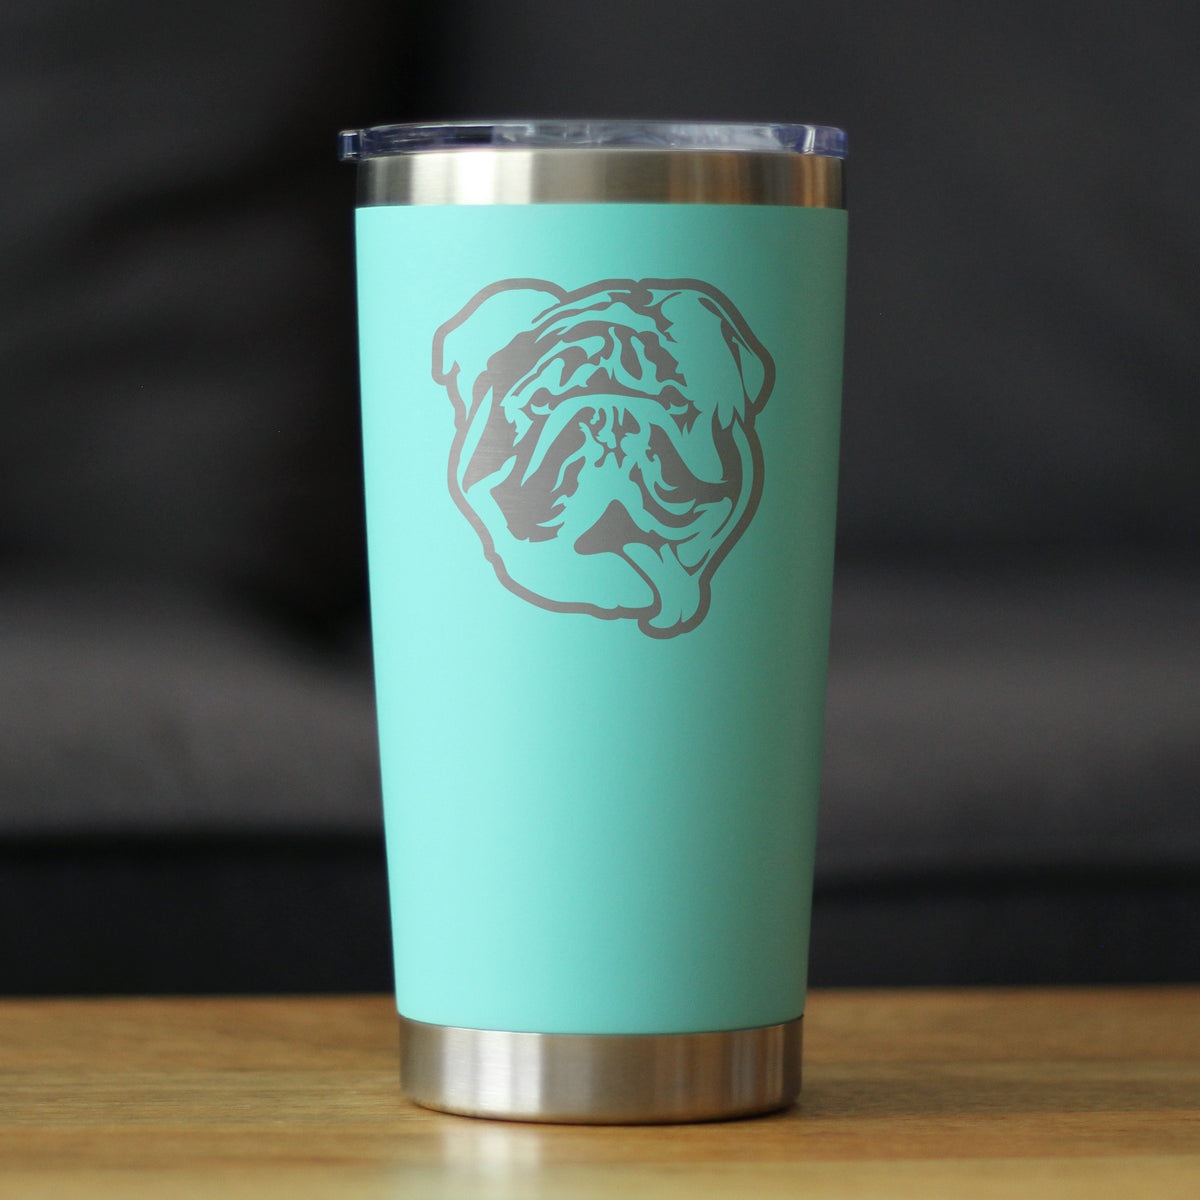 English Bulldog - Insulated Coffee Tumbler Cup with Sliding Lid - Stainless Steel Insulated Mug - Fun Unique Bulldog Themed Décor and Gifts for Men &amp; Women